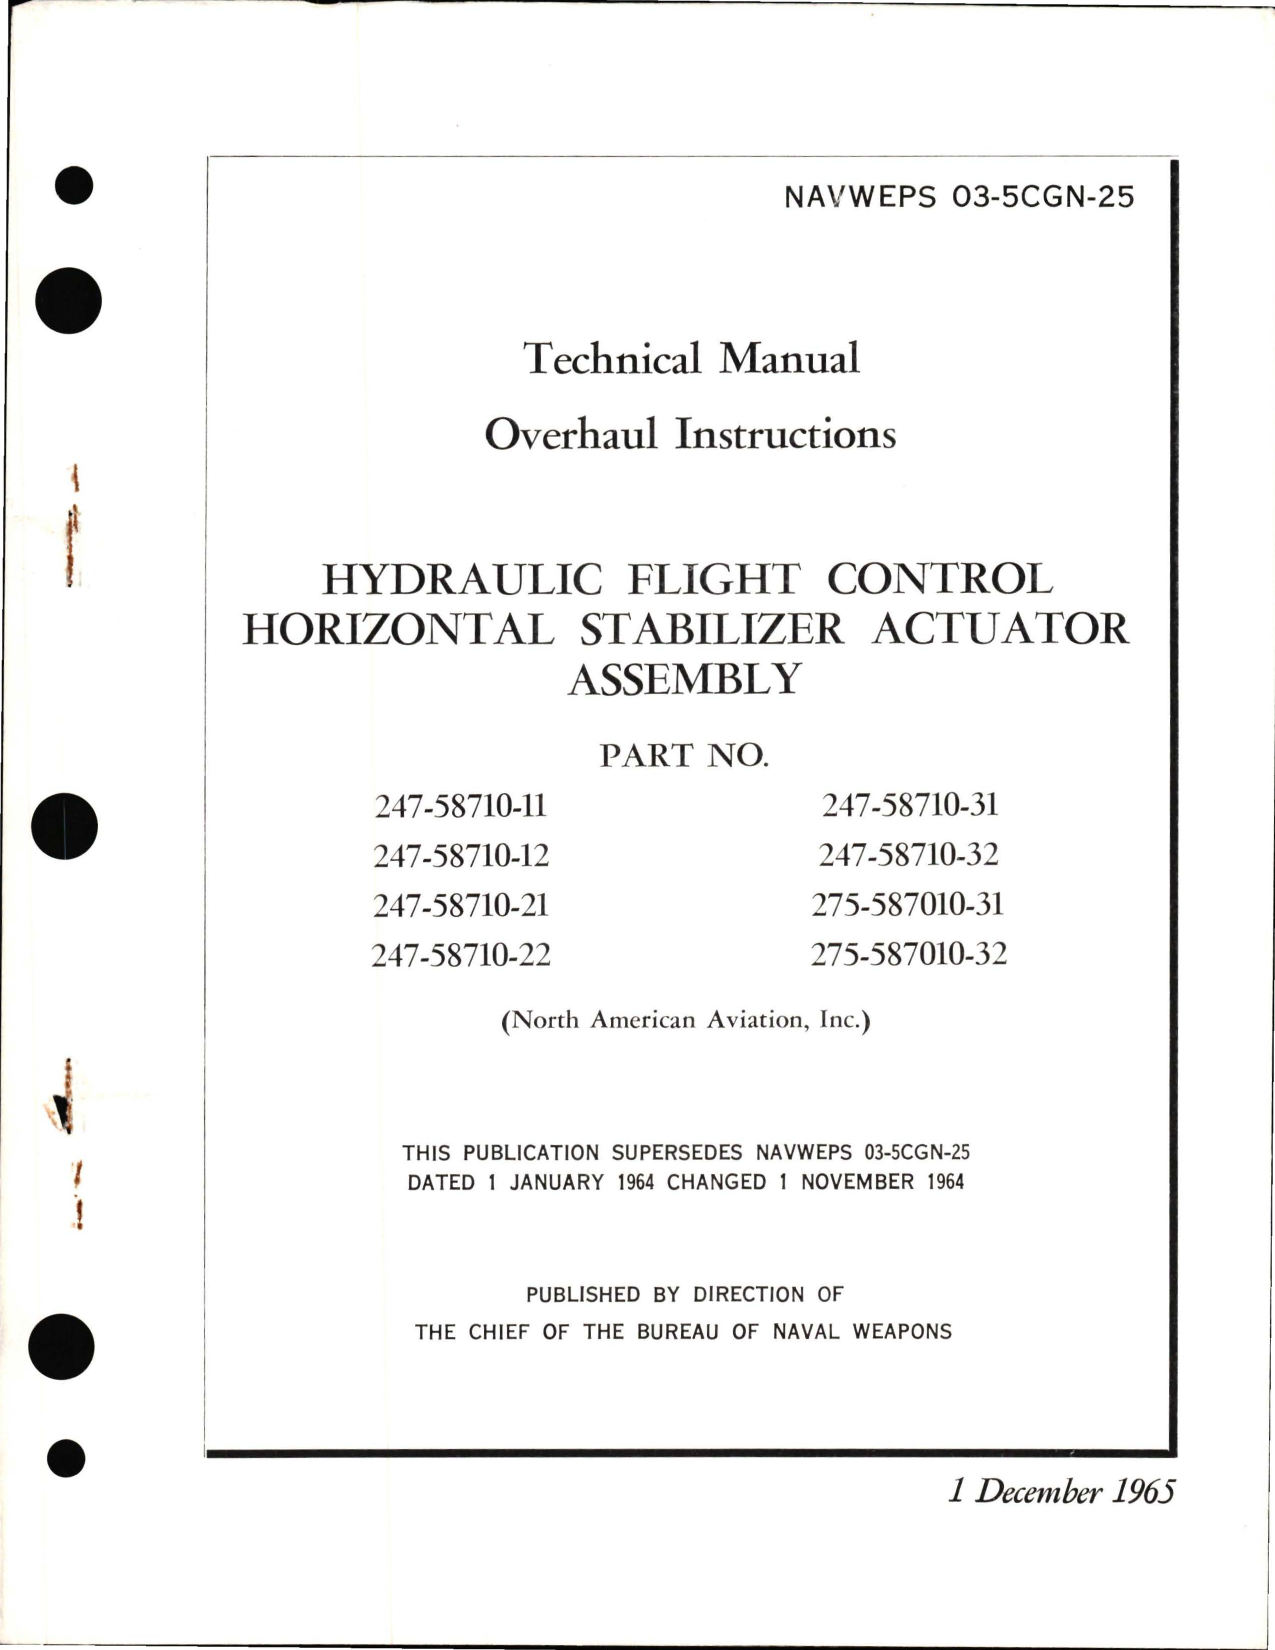 Sample page 1 from AirCorps Library document: Overhaul Instructions for Hydraulic Flight Control Horizontal Stabilizer Actuator Assembly - Part 247-58710 Series